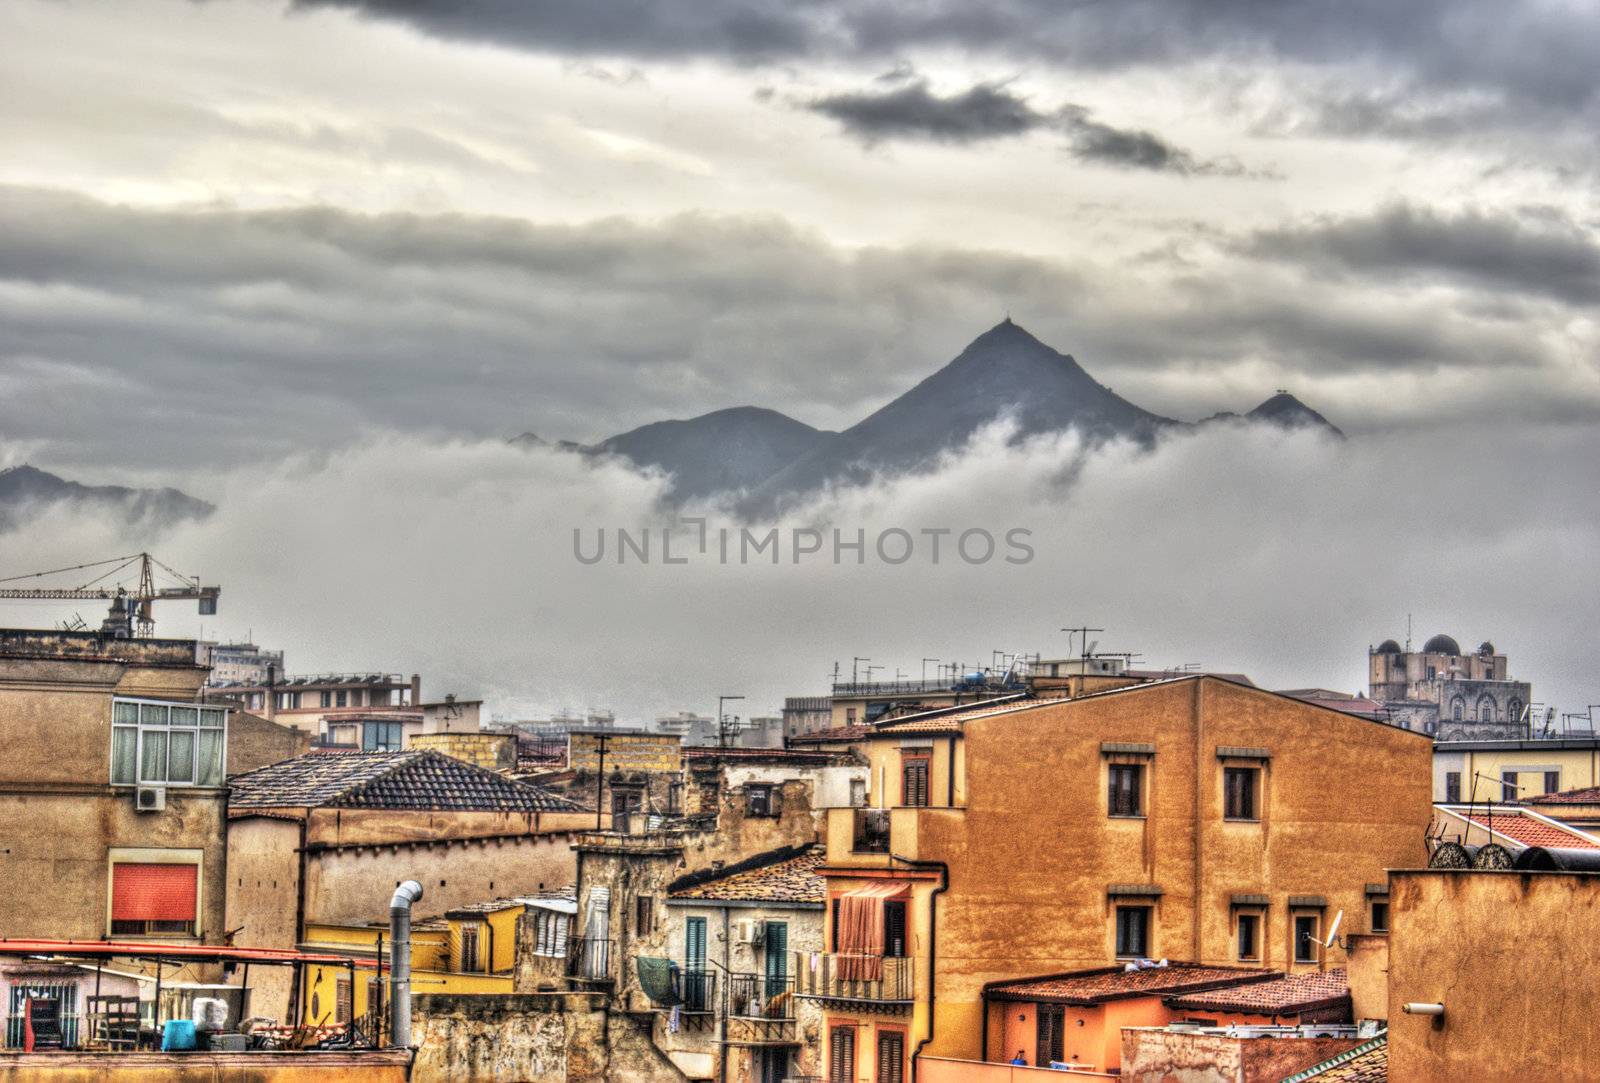 View of Palermo city in the clouds in high dynamic range. Sicily- Italy